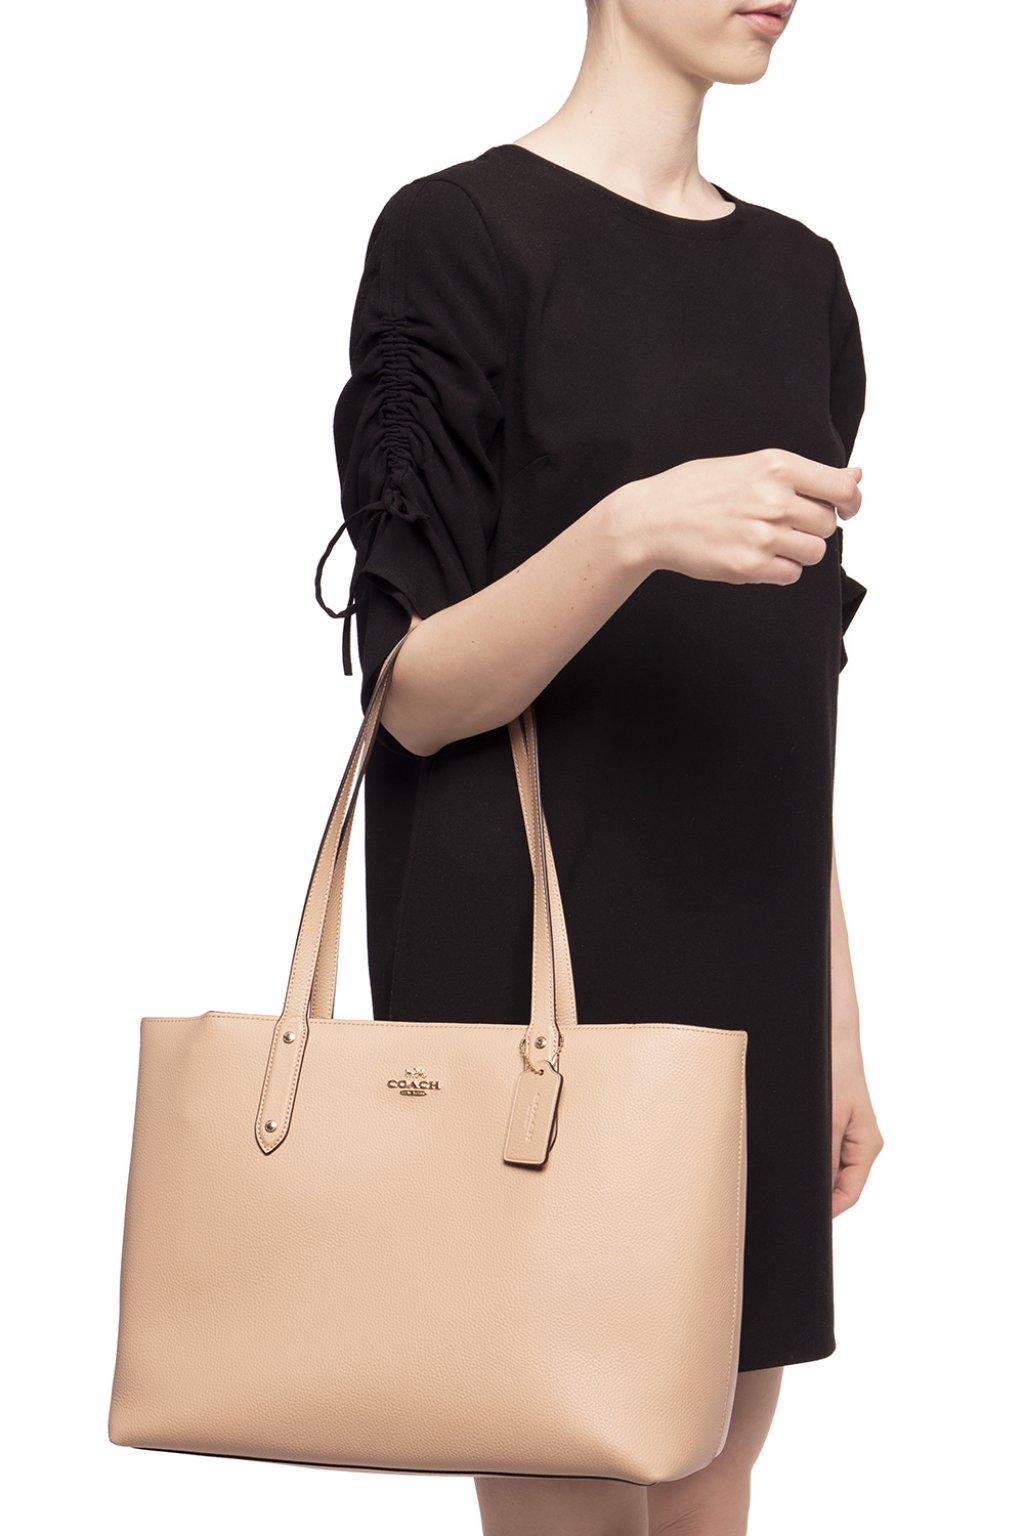 COACH 'central' Tote Bag Beige in Natural | Lyst